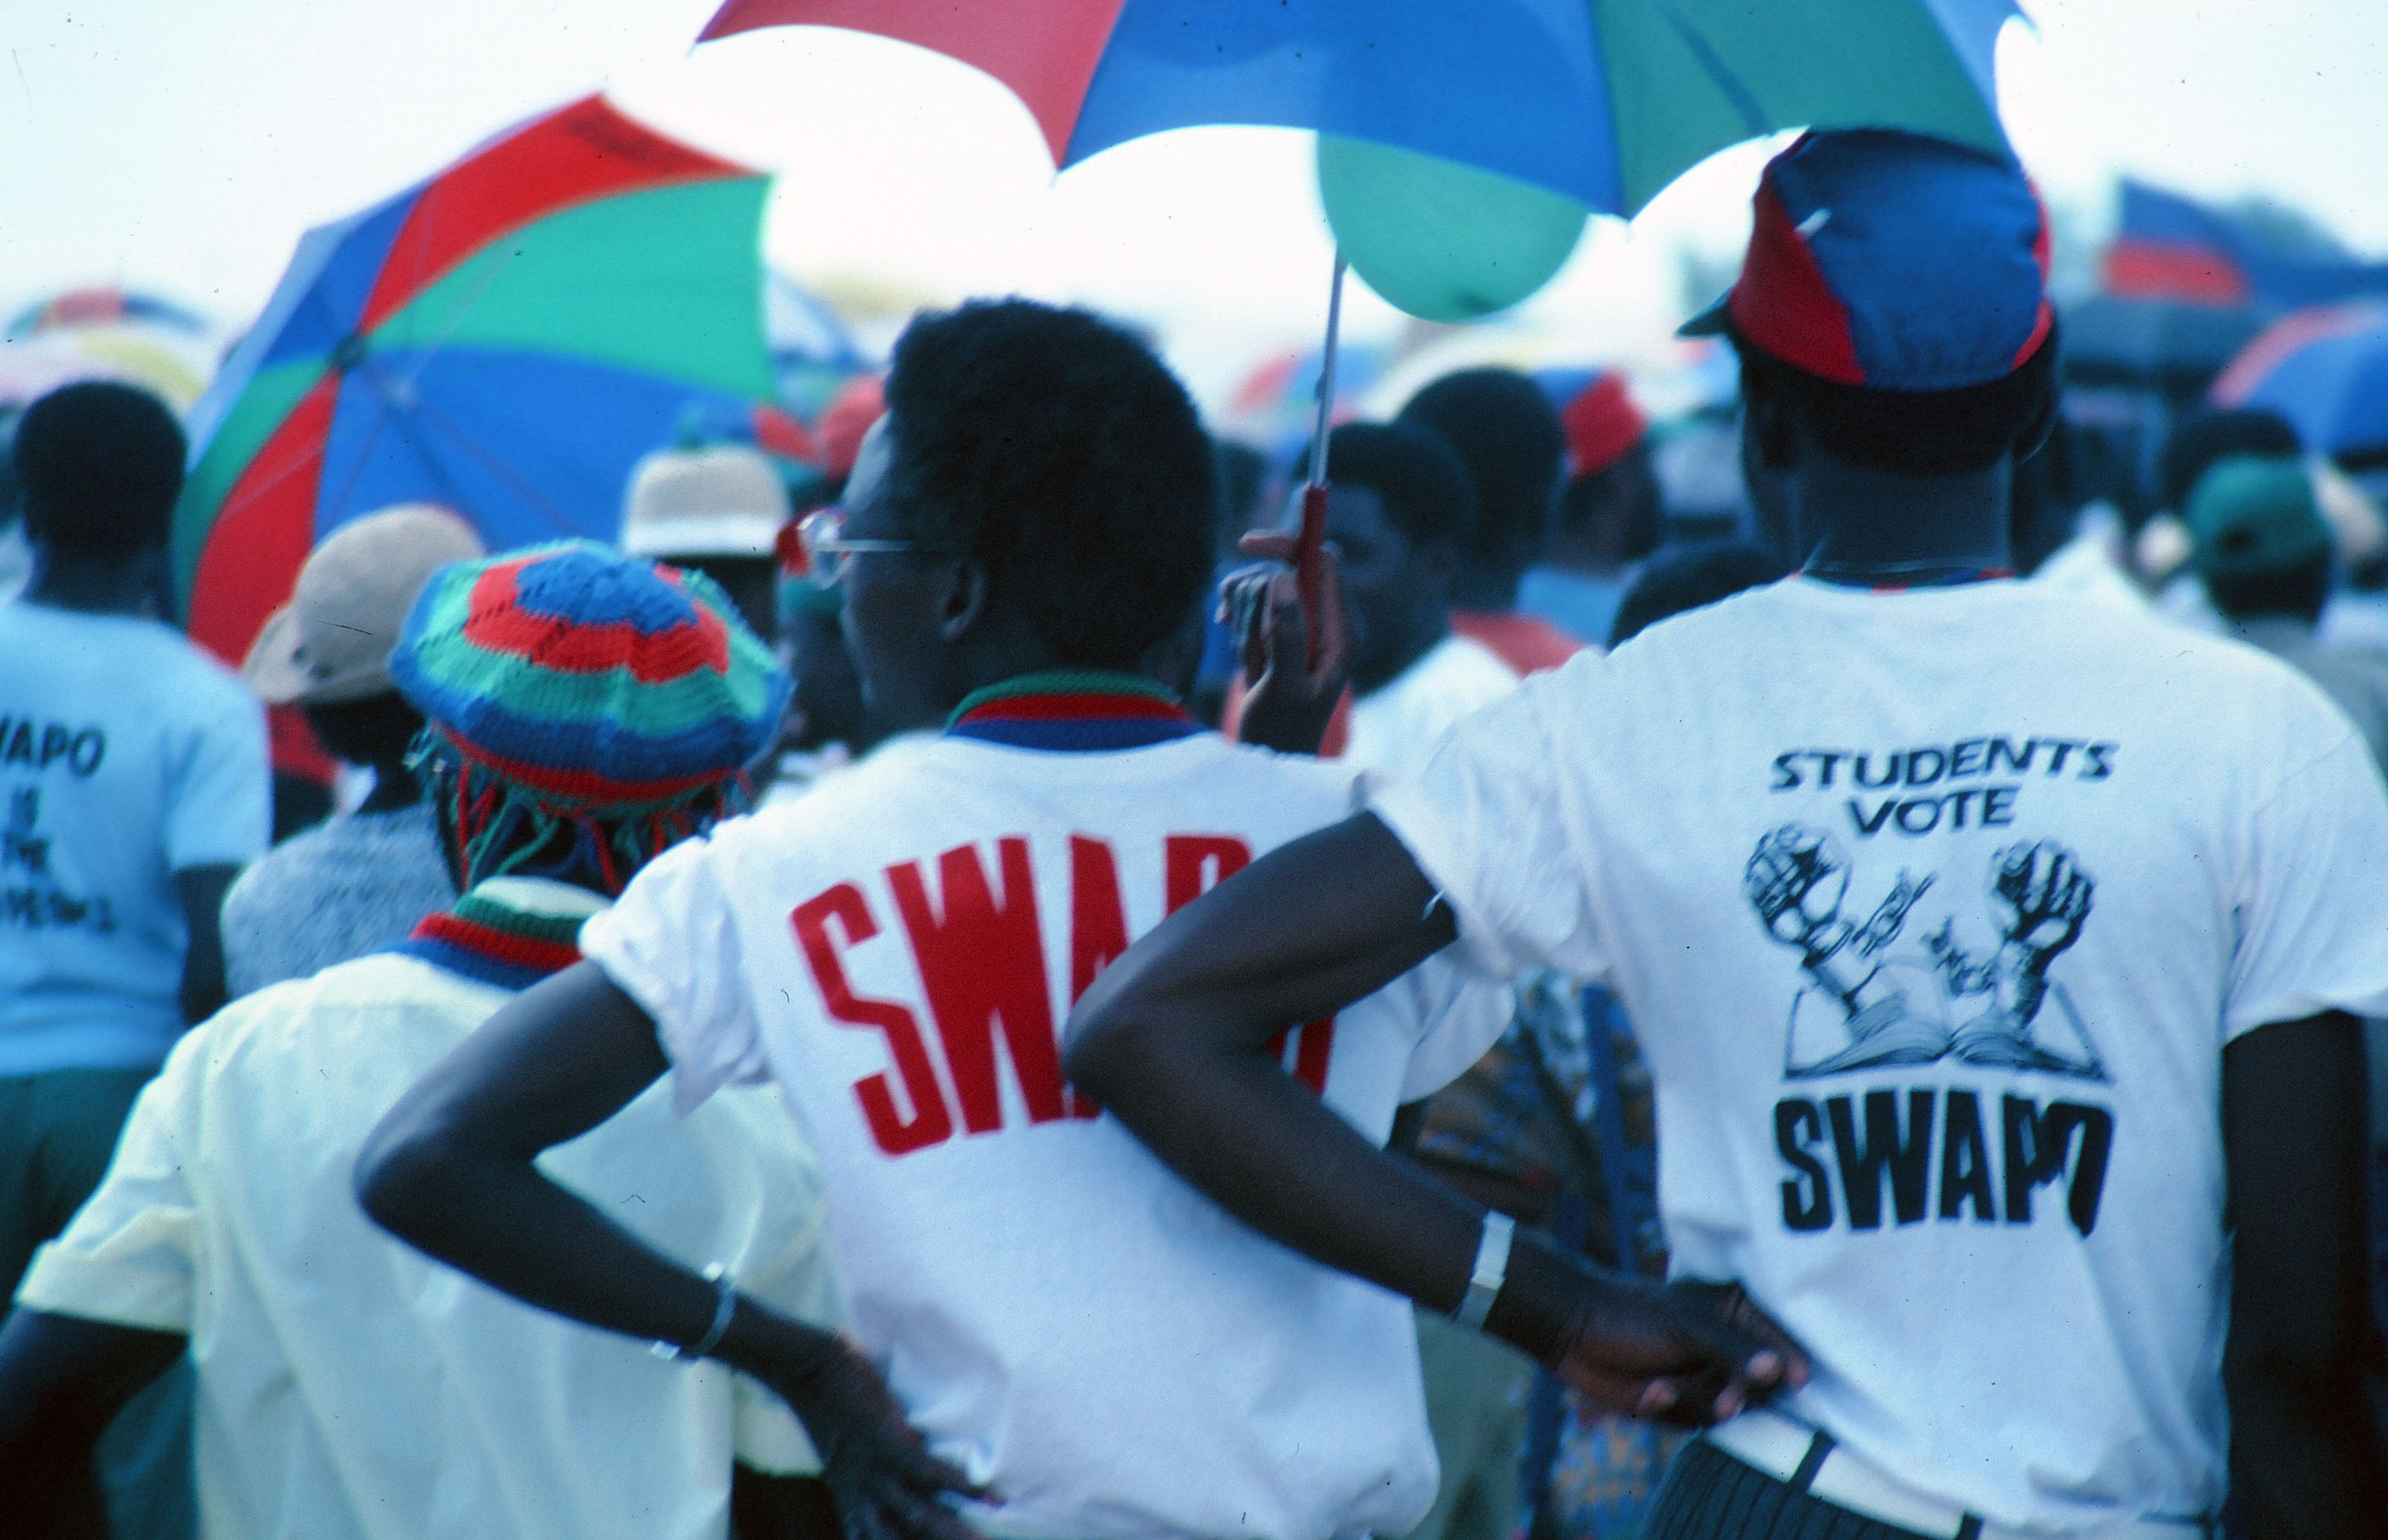 T-Shirts showing support for SWAPO